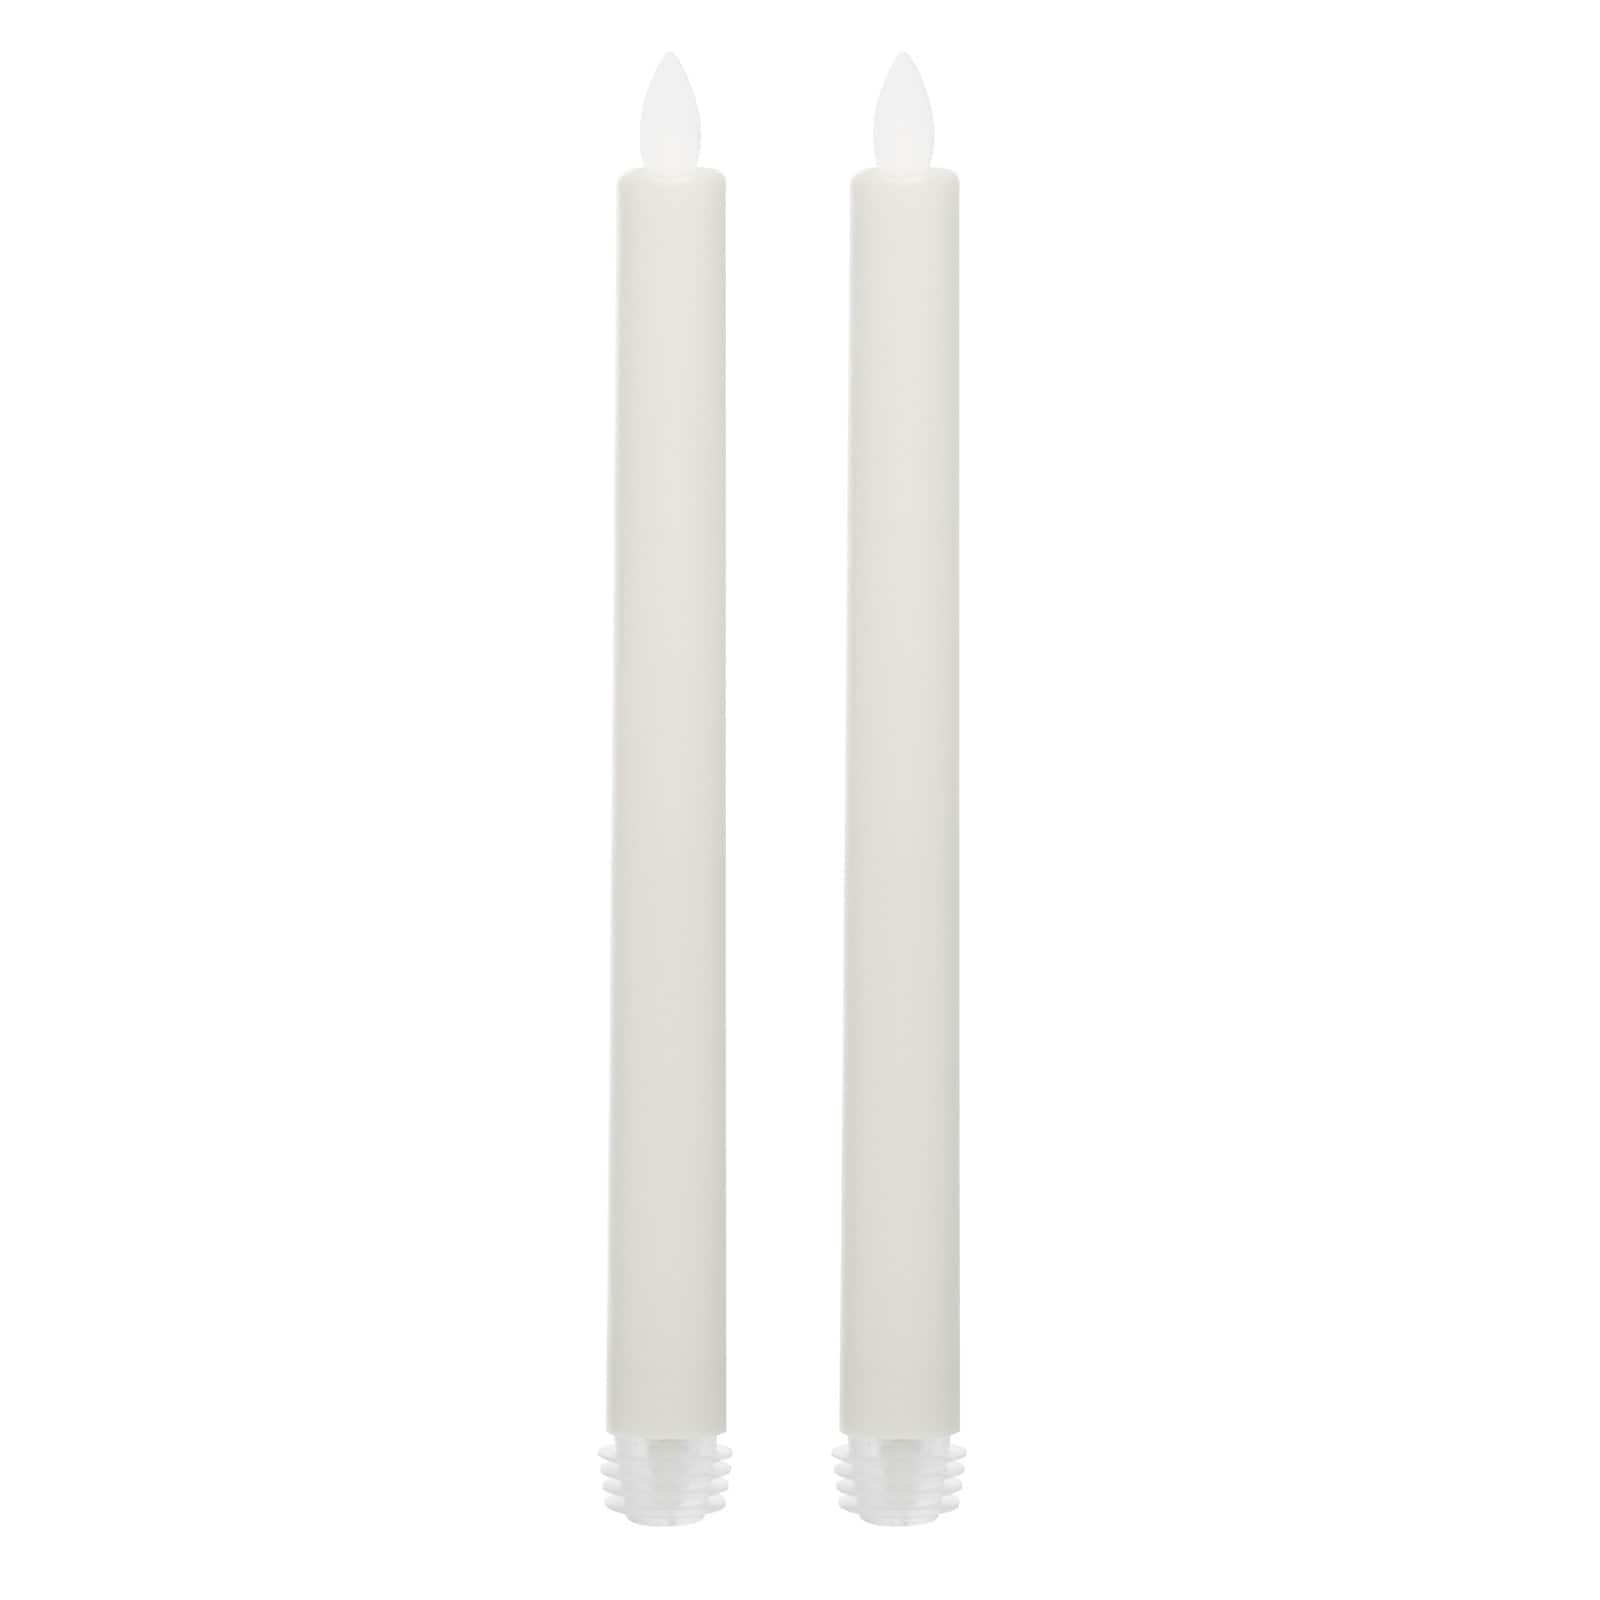 50 x White Taper LED Battery Stick Candle Wedding Table Room Candleabra BULK BUY 